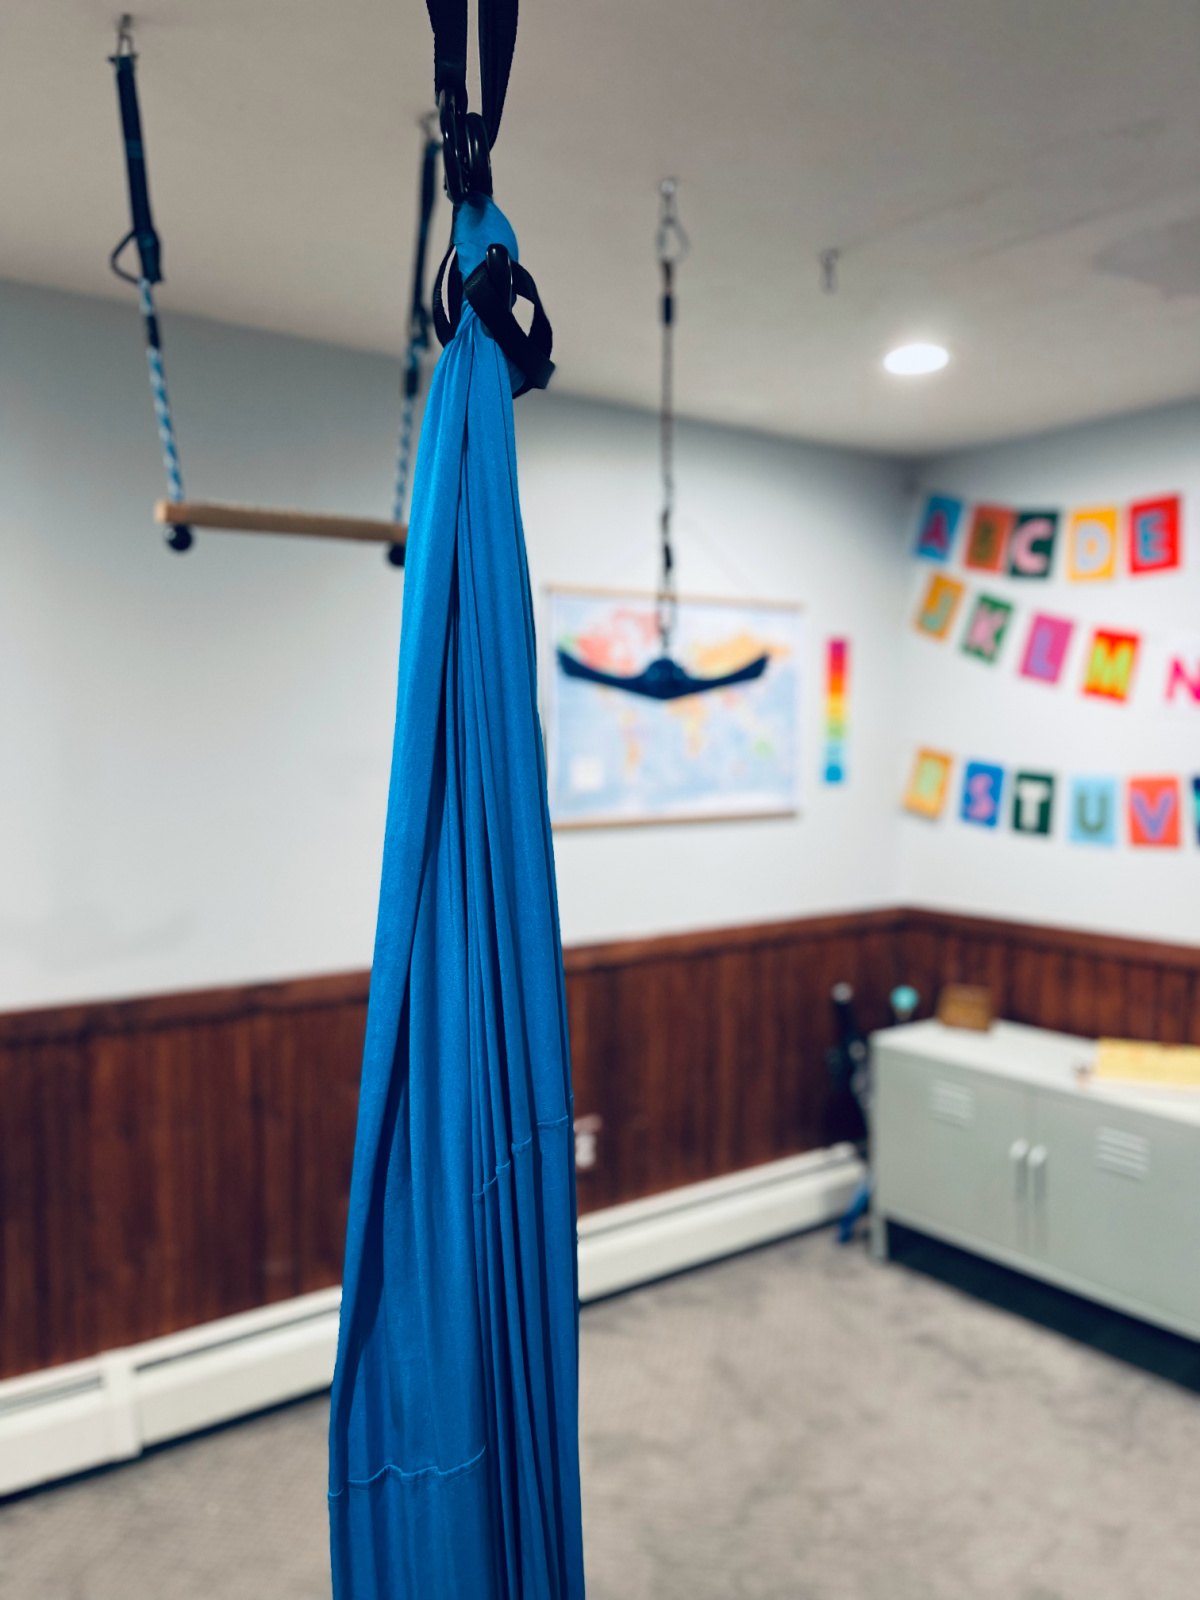 sensory swing in playroom with ninja rings and alphabet banner in background.